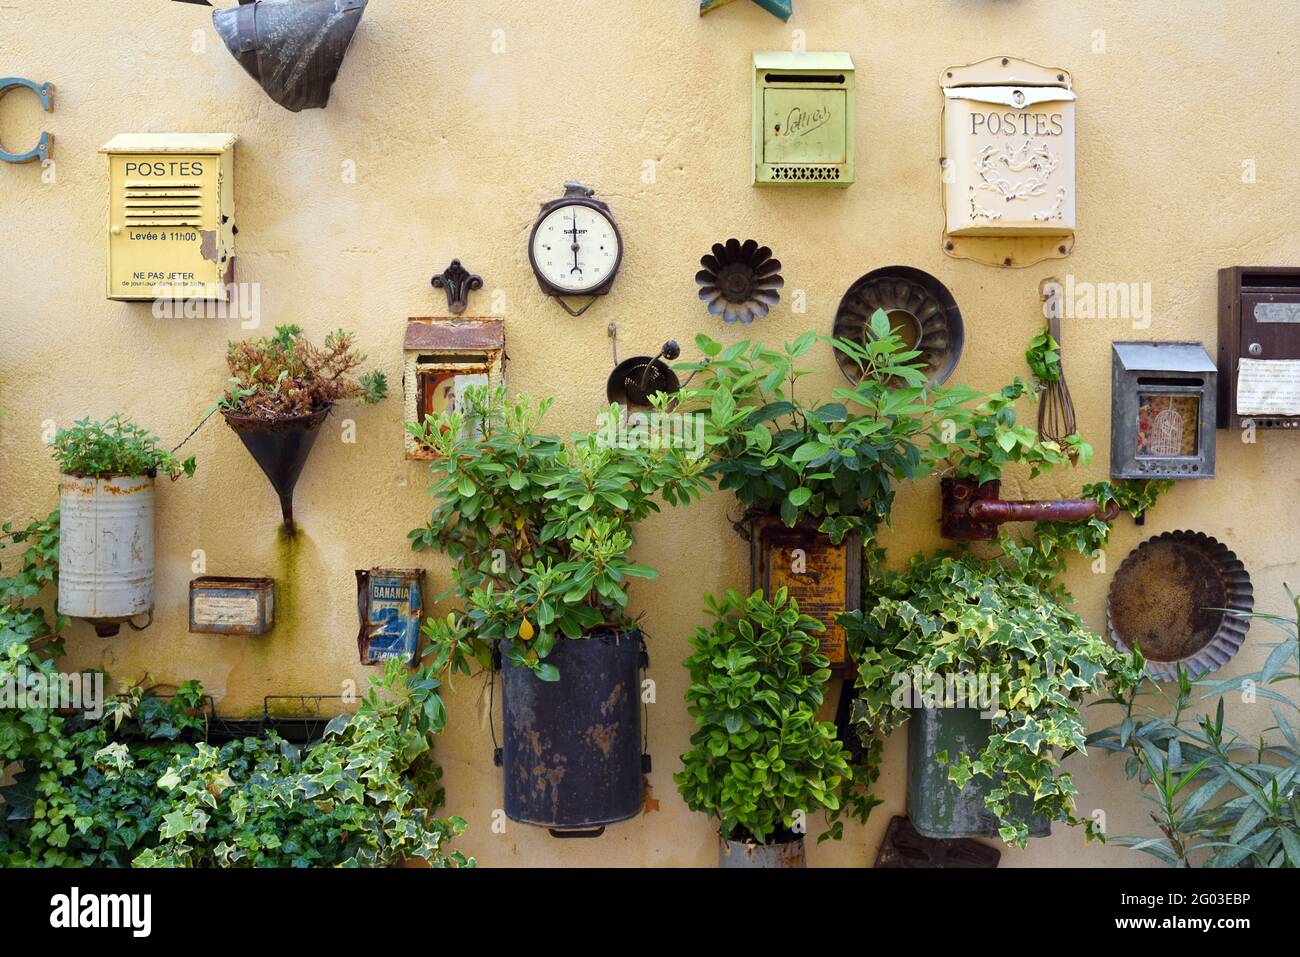 Assortment or Display of Vintage or Recycled Wall Planters, Letter Boxes and Reused Flower Pot Containers Saint Remy de Provence France Stock Photo